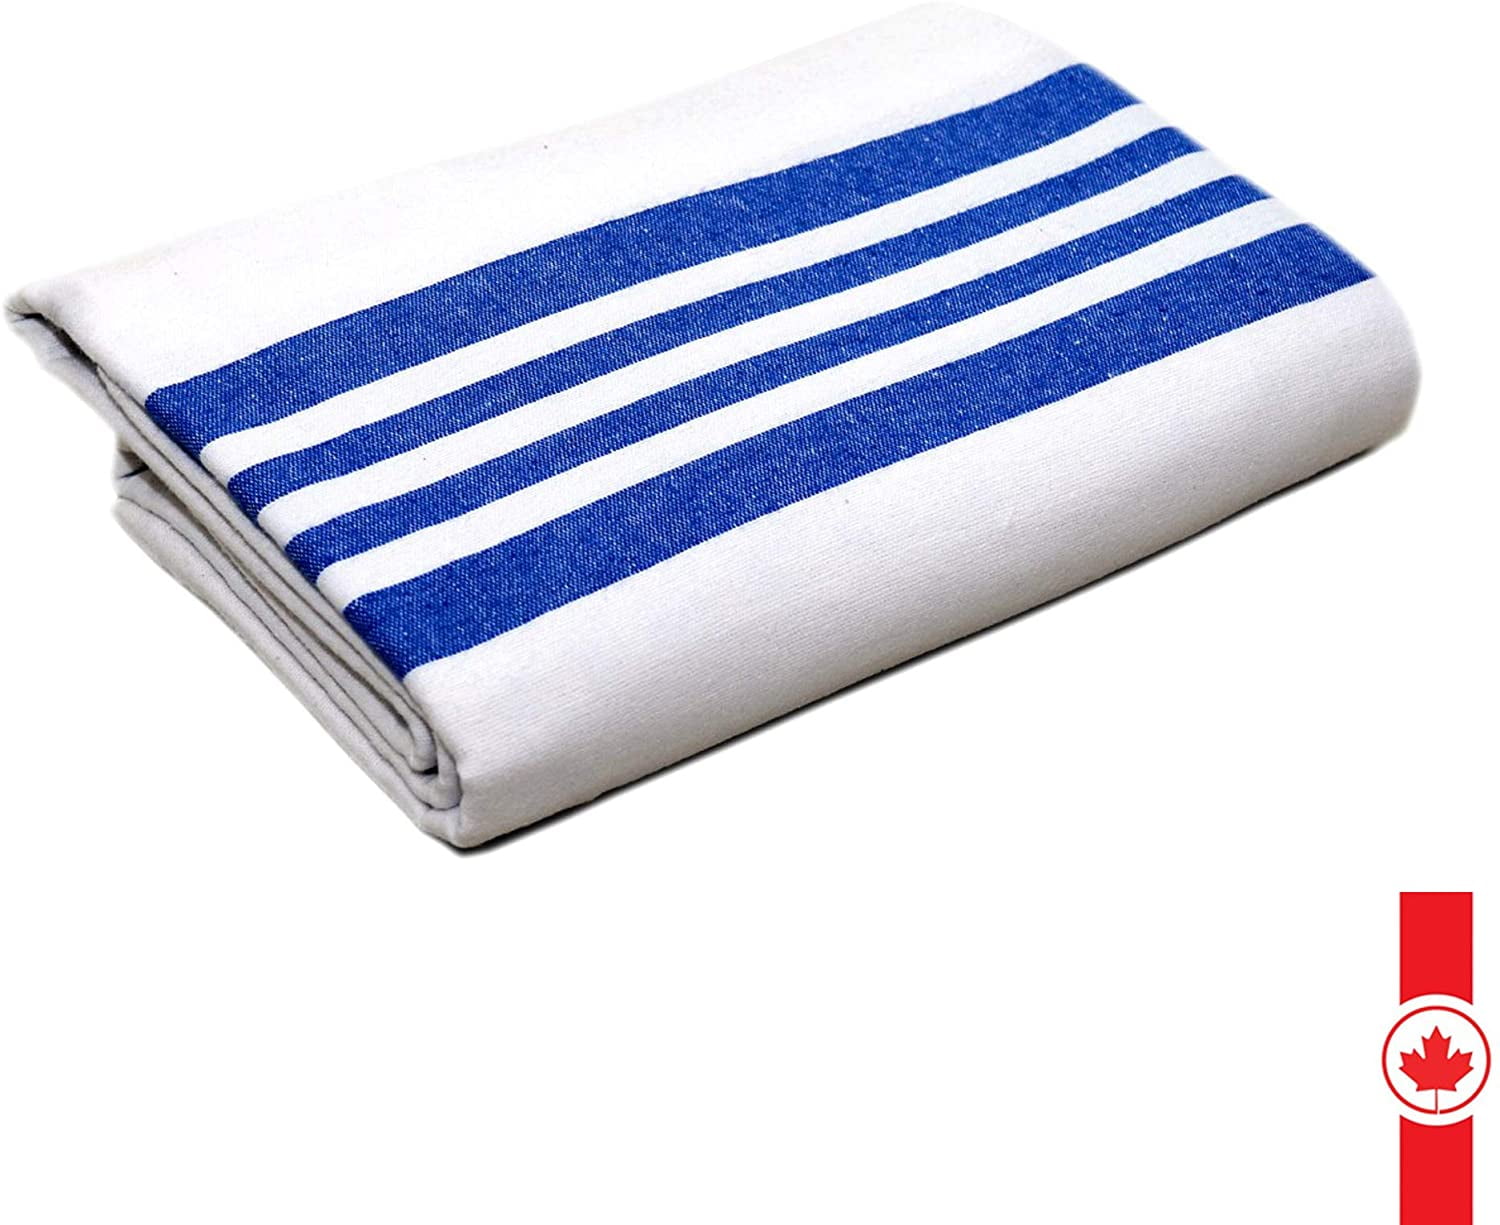 Lightweight Cozy 1 Comfortable Heavy Napping/Sleeping Bed Blanket Luxury Flannel Blanket Soft White with Blue Stripe by Raymond Clarke